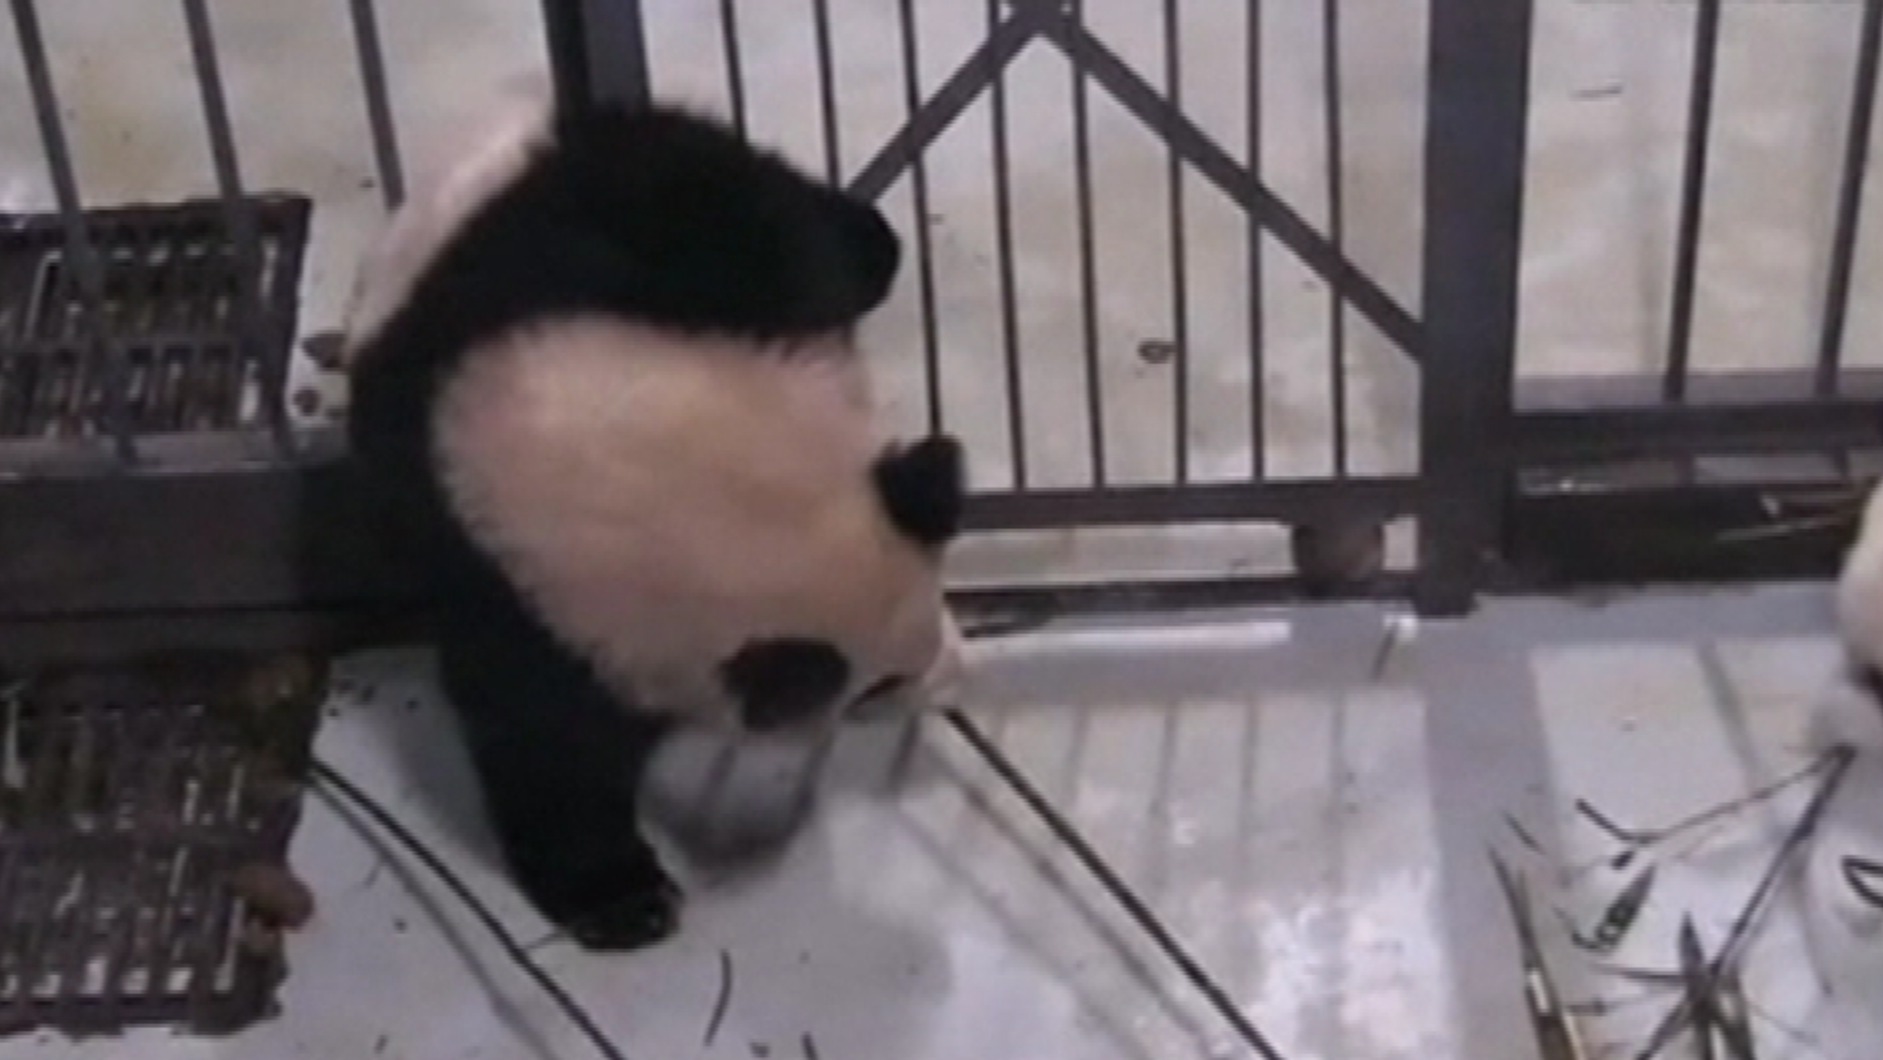 Video shows giant panda squeezing through iron bars to join a friend ...